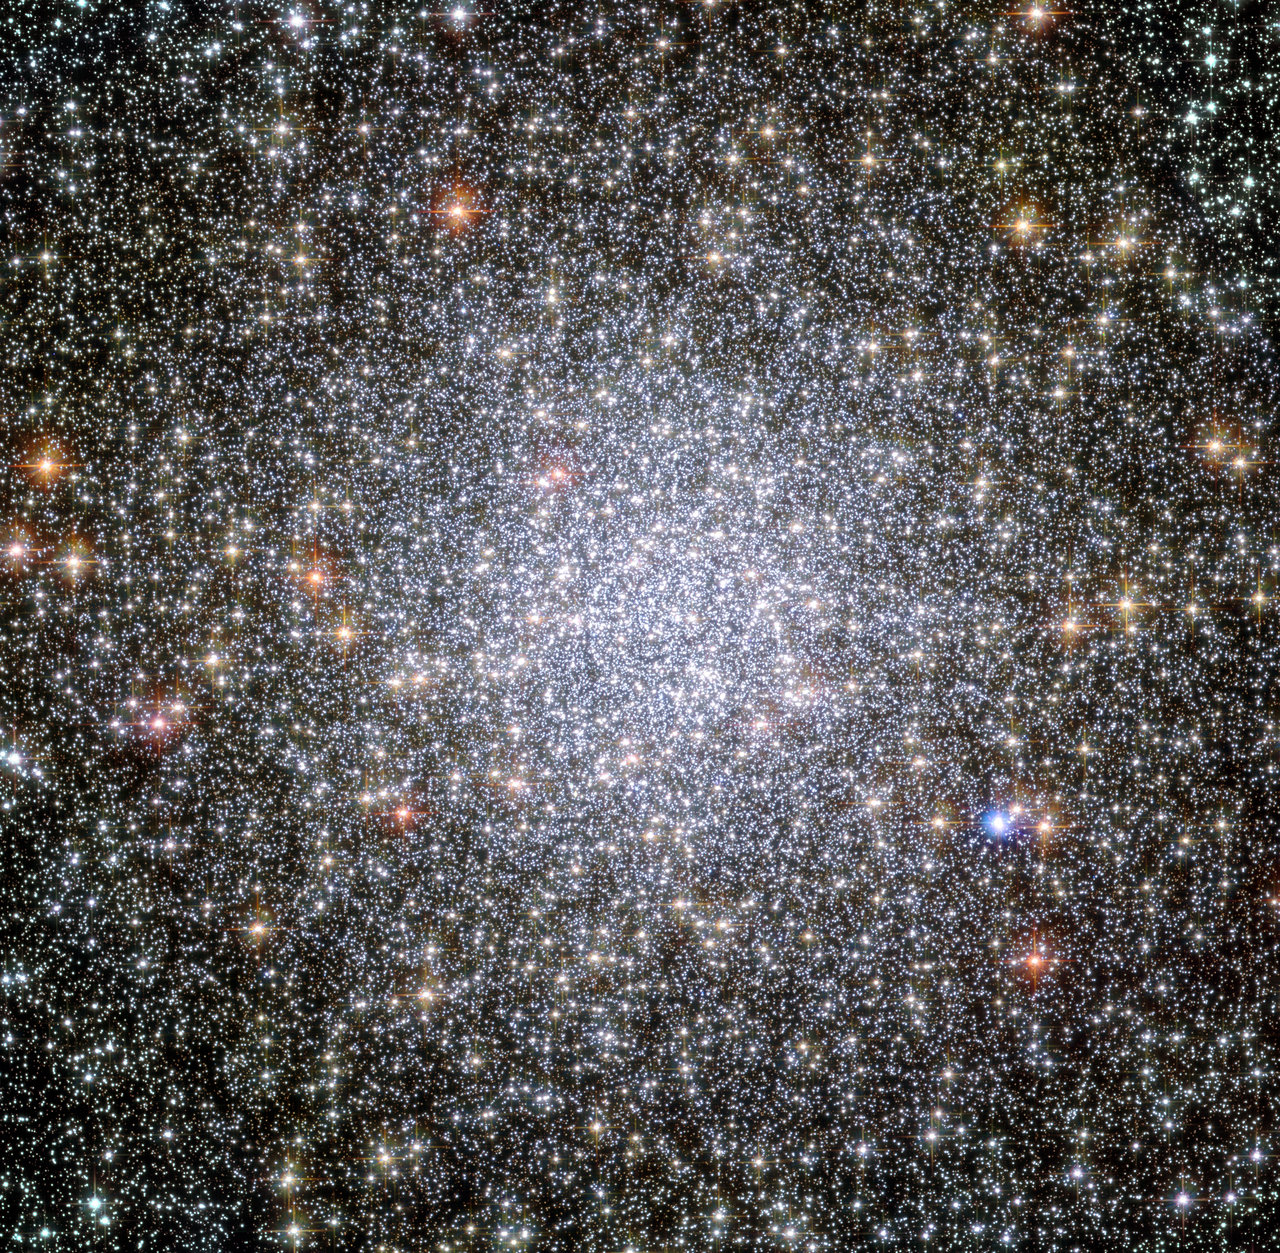 Globular star clusters like this one, 47 Tucanae, might be excellent places to search for interstellar civilizations. Their crowded nature means intelligent life at our stage of technological advancement could send probes to the nearest stars. Image credit: NASA/ESA/Hubble Heritage